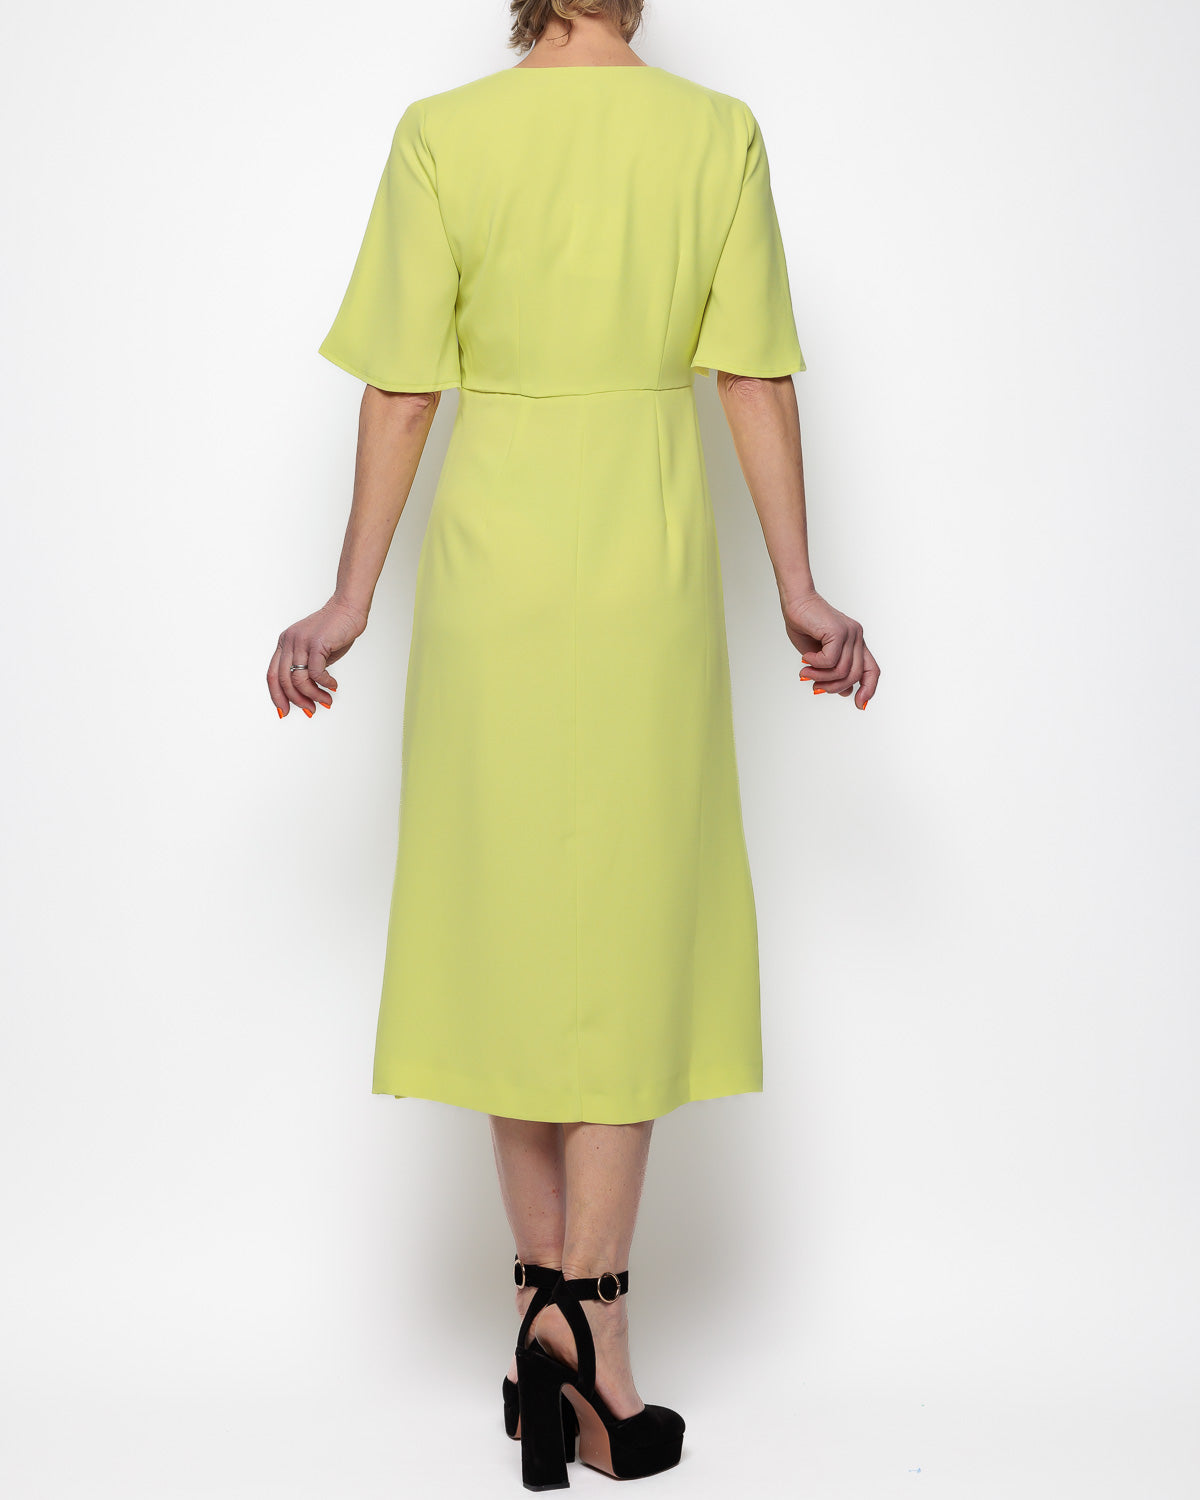 Emme Marella Whist Dress in Citrus Yellow